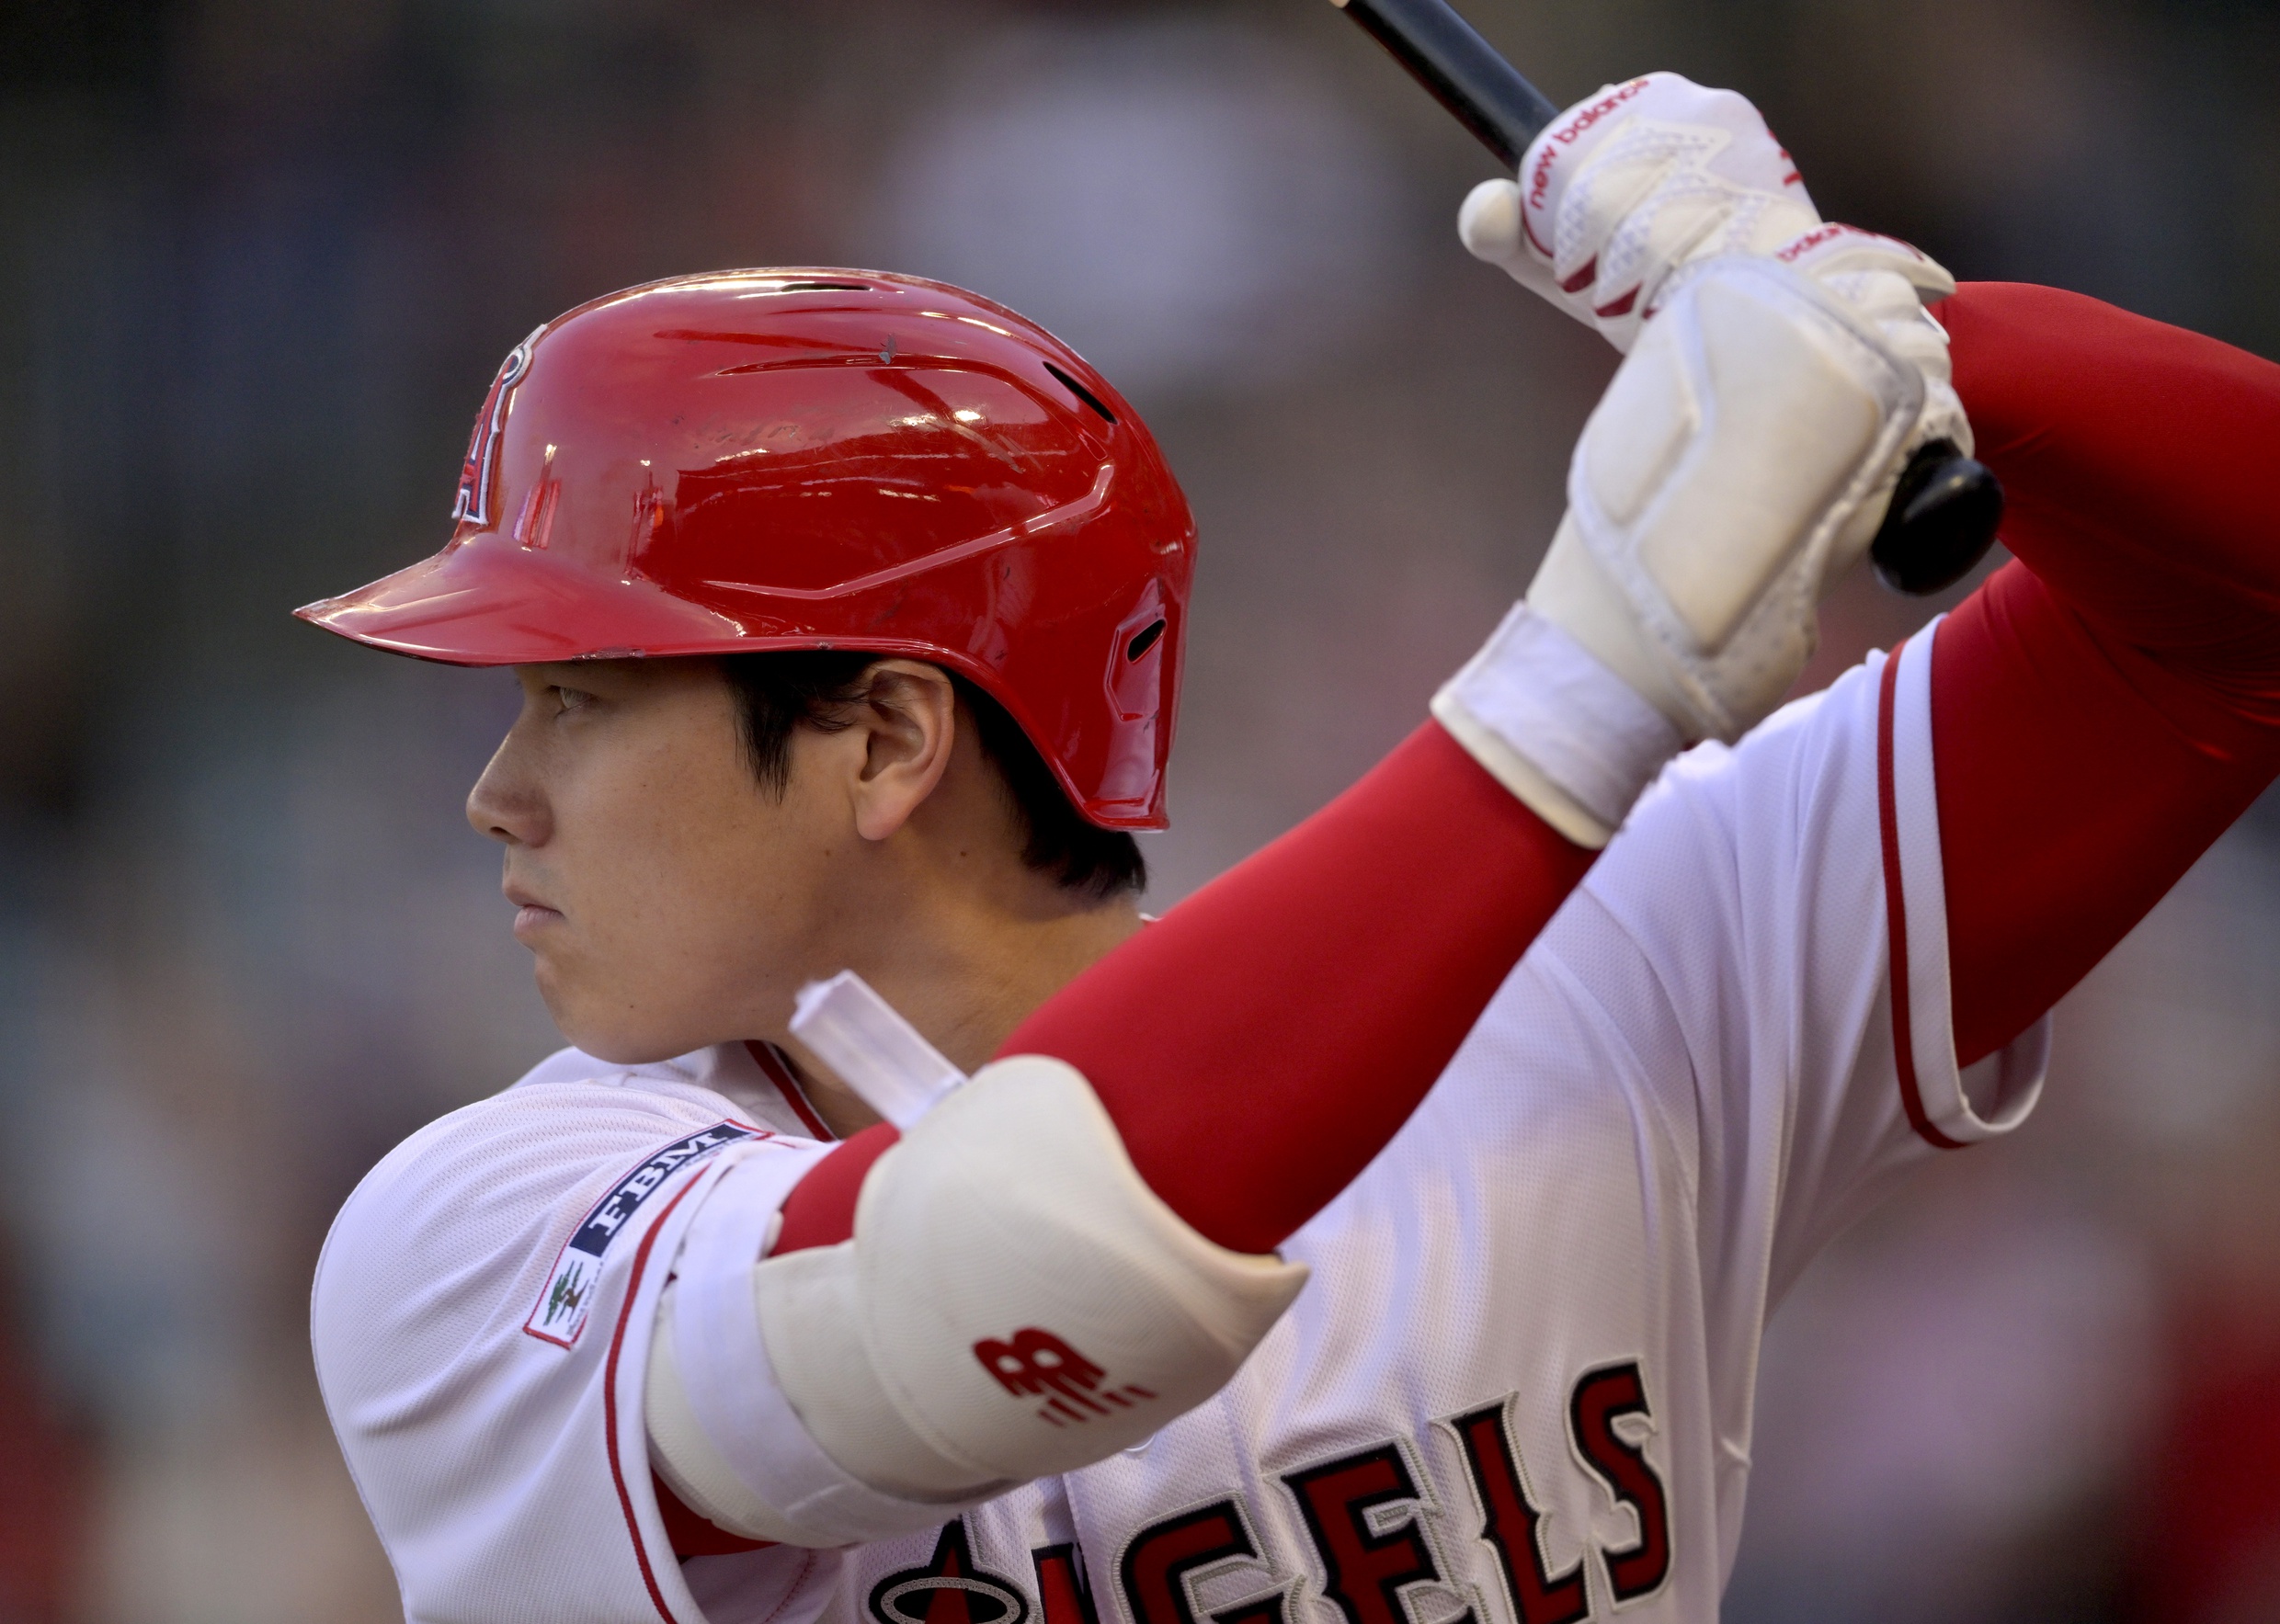 MLB: Los Angeles Angels two-way superstar Shohei Ohtani was